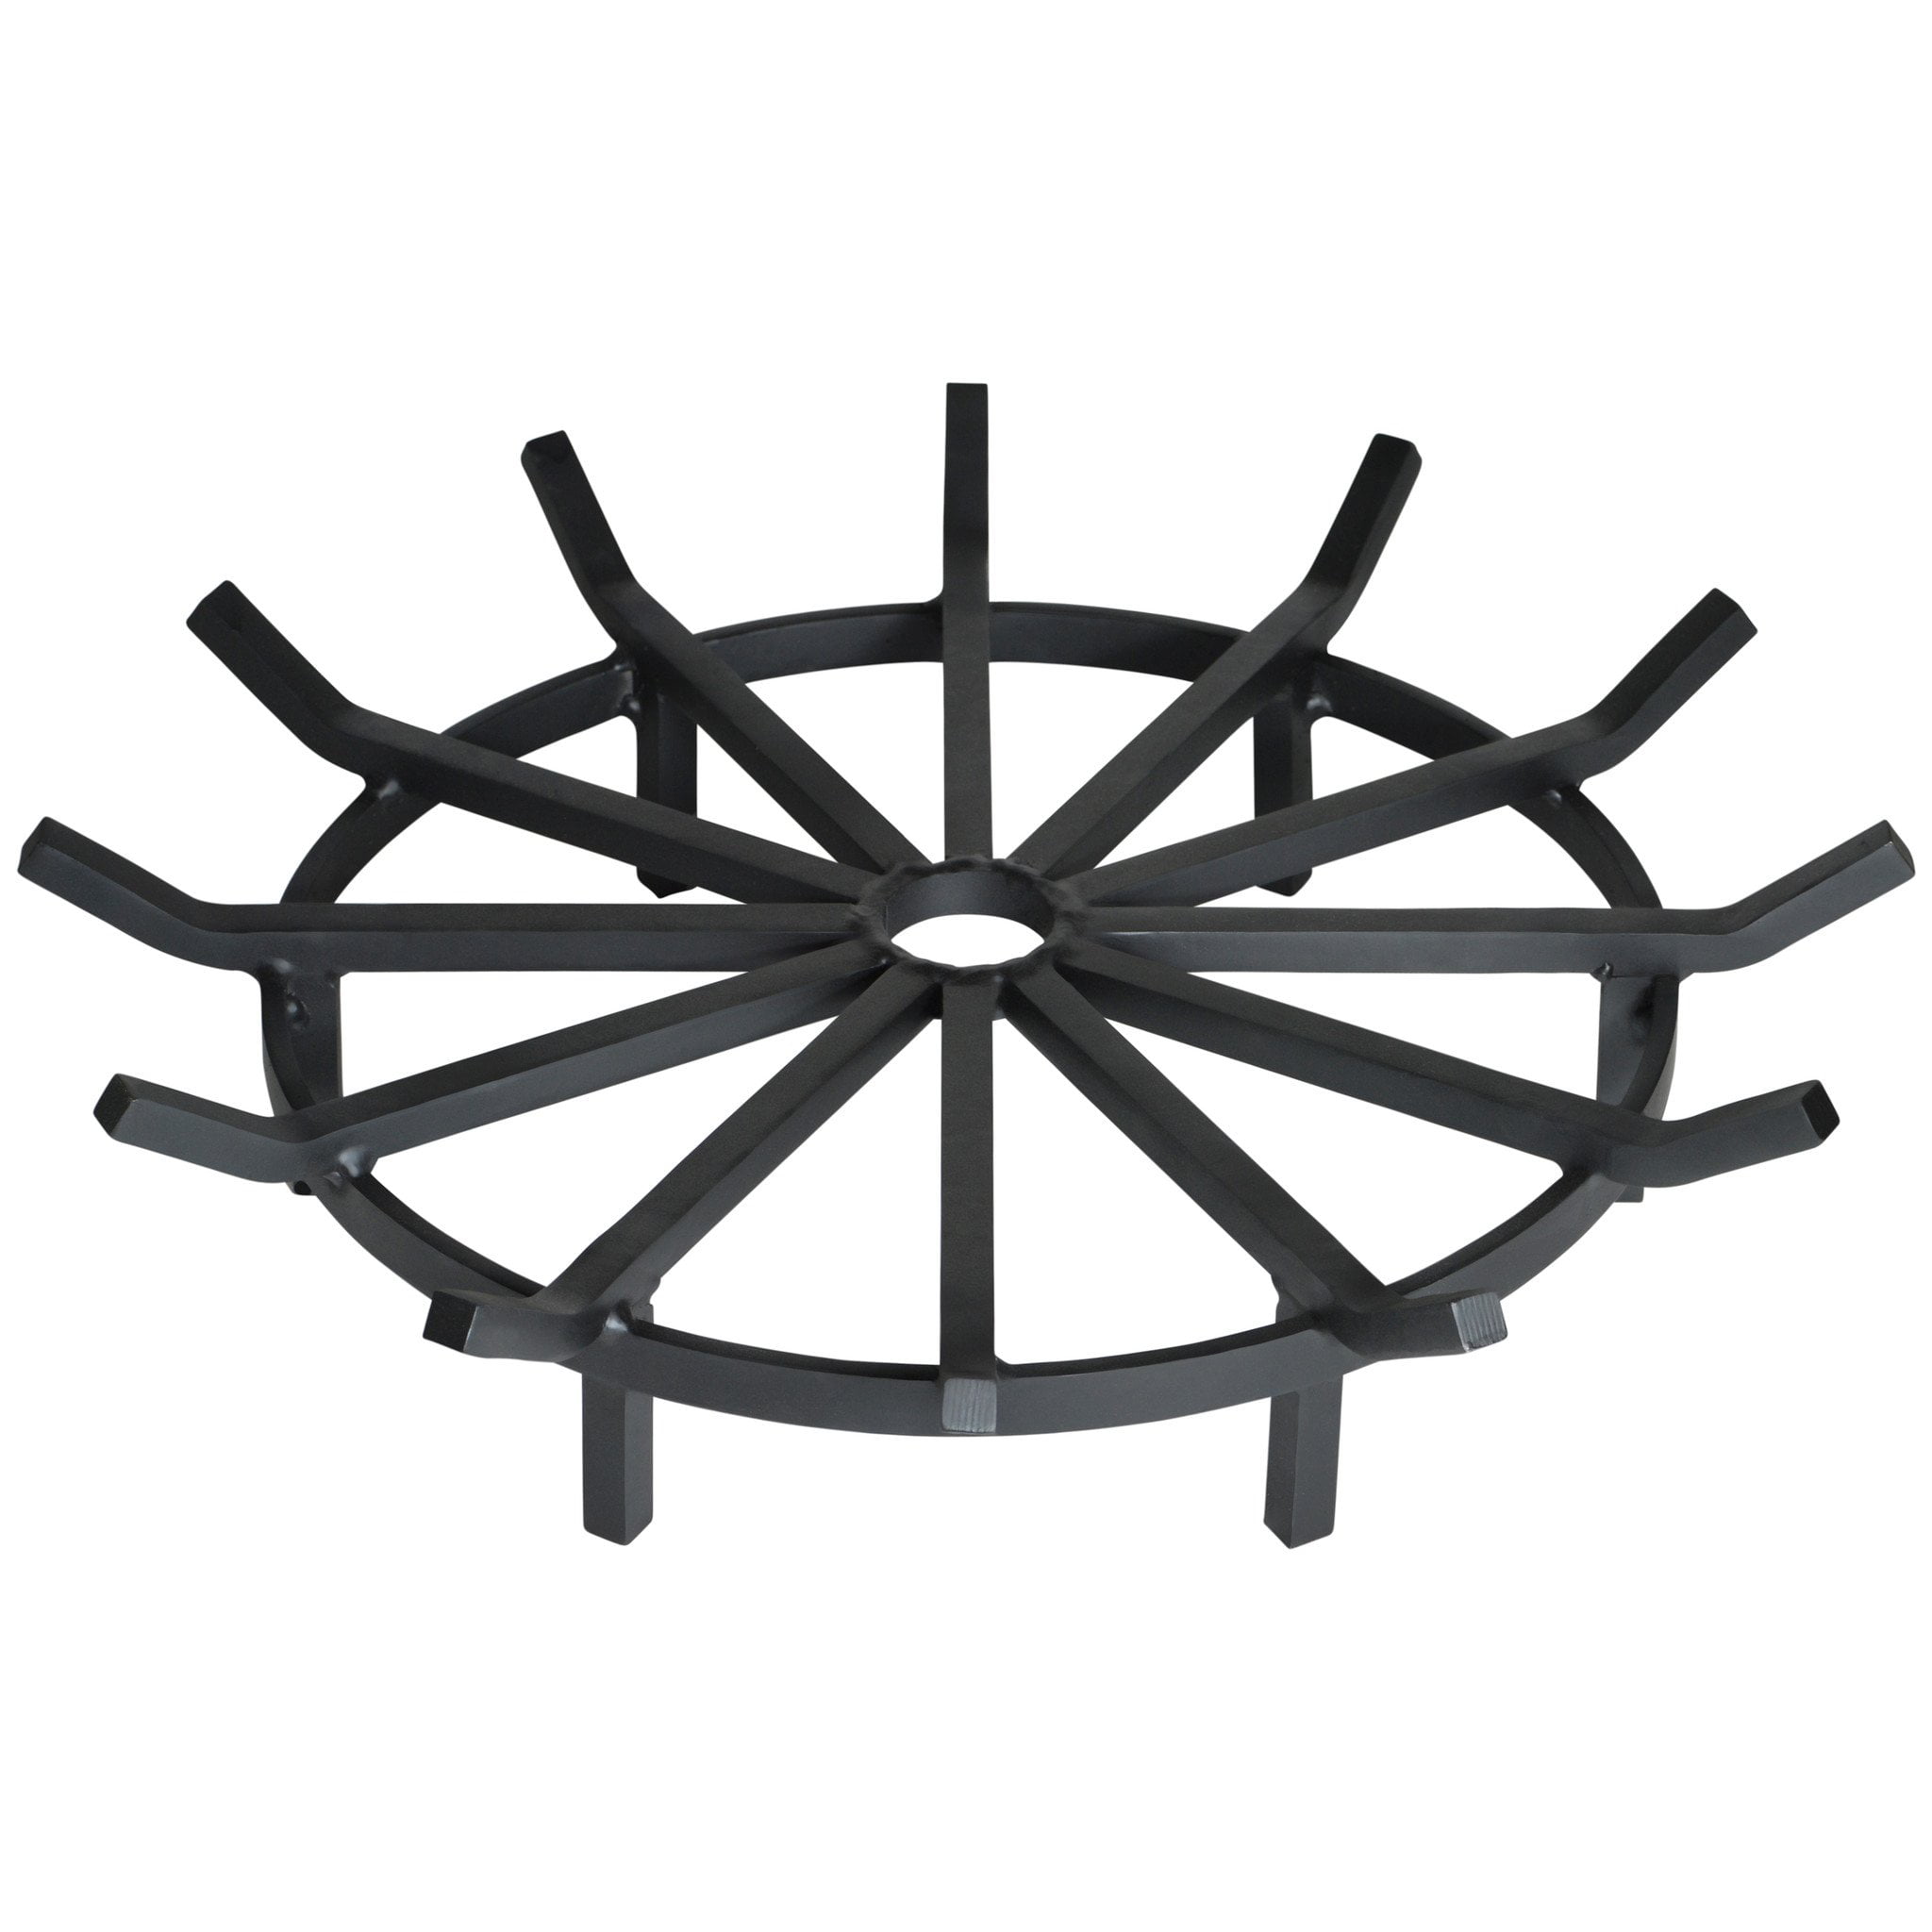 SteelFreak Heavy Duty Wagon Wheel Firewood Grate for Fire Pit 20 Inch Made in The USA 